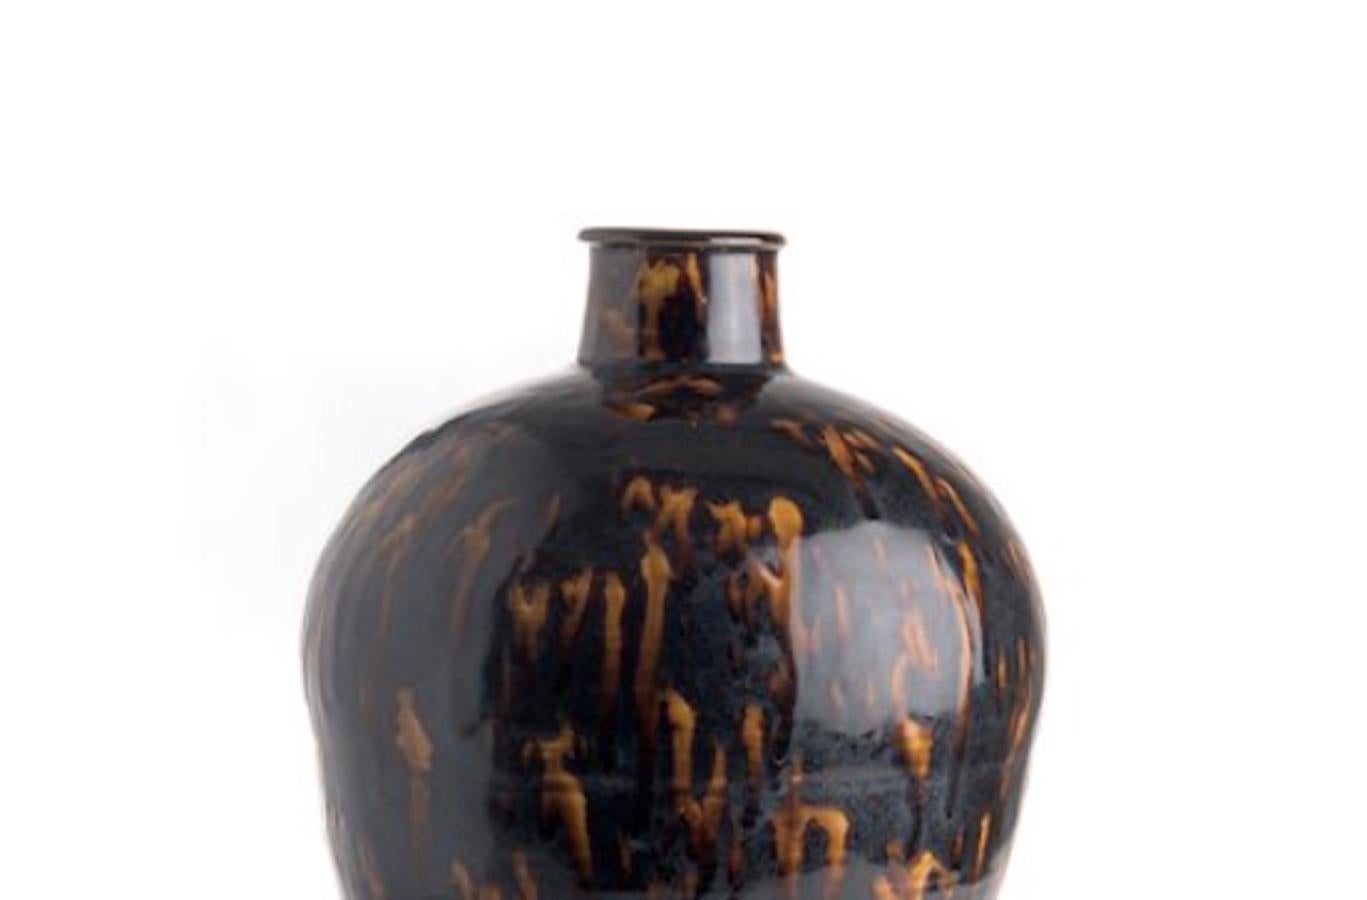 Contemporary Chinese ceramic vase with decorative tortoise glaze design
Two available and sold individually.
